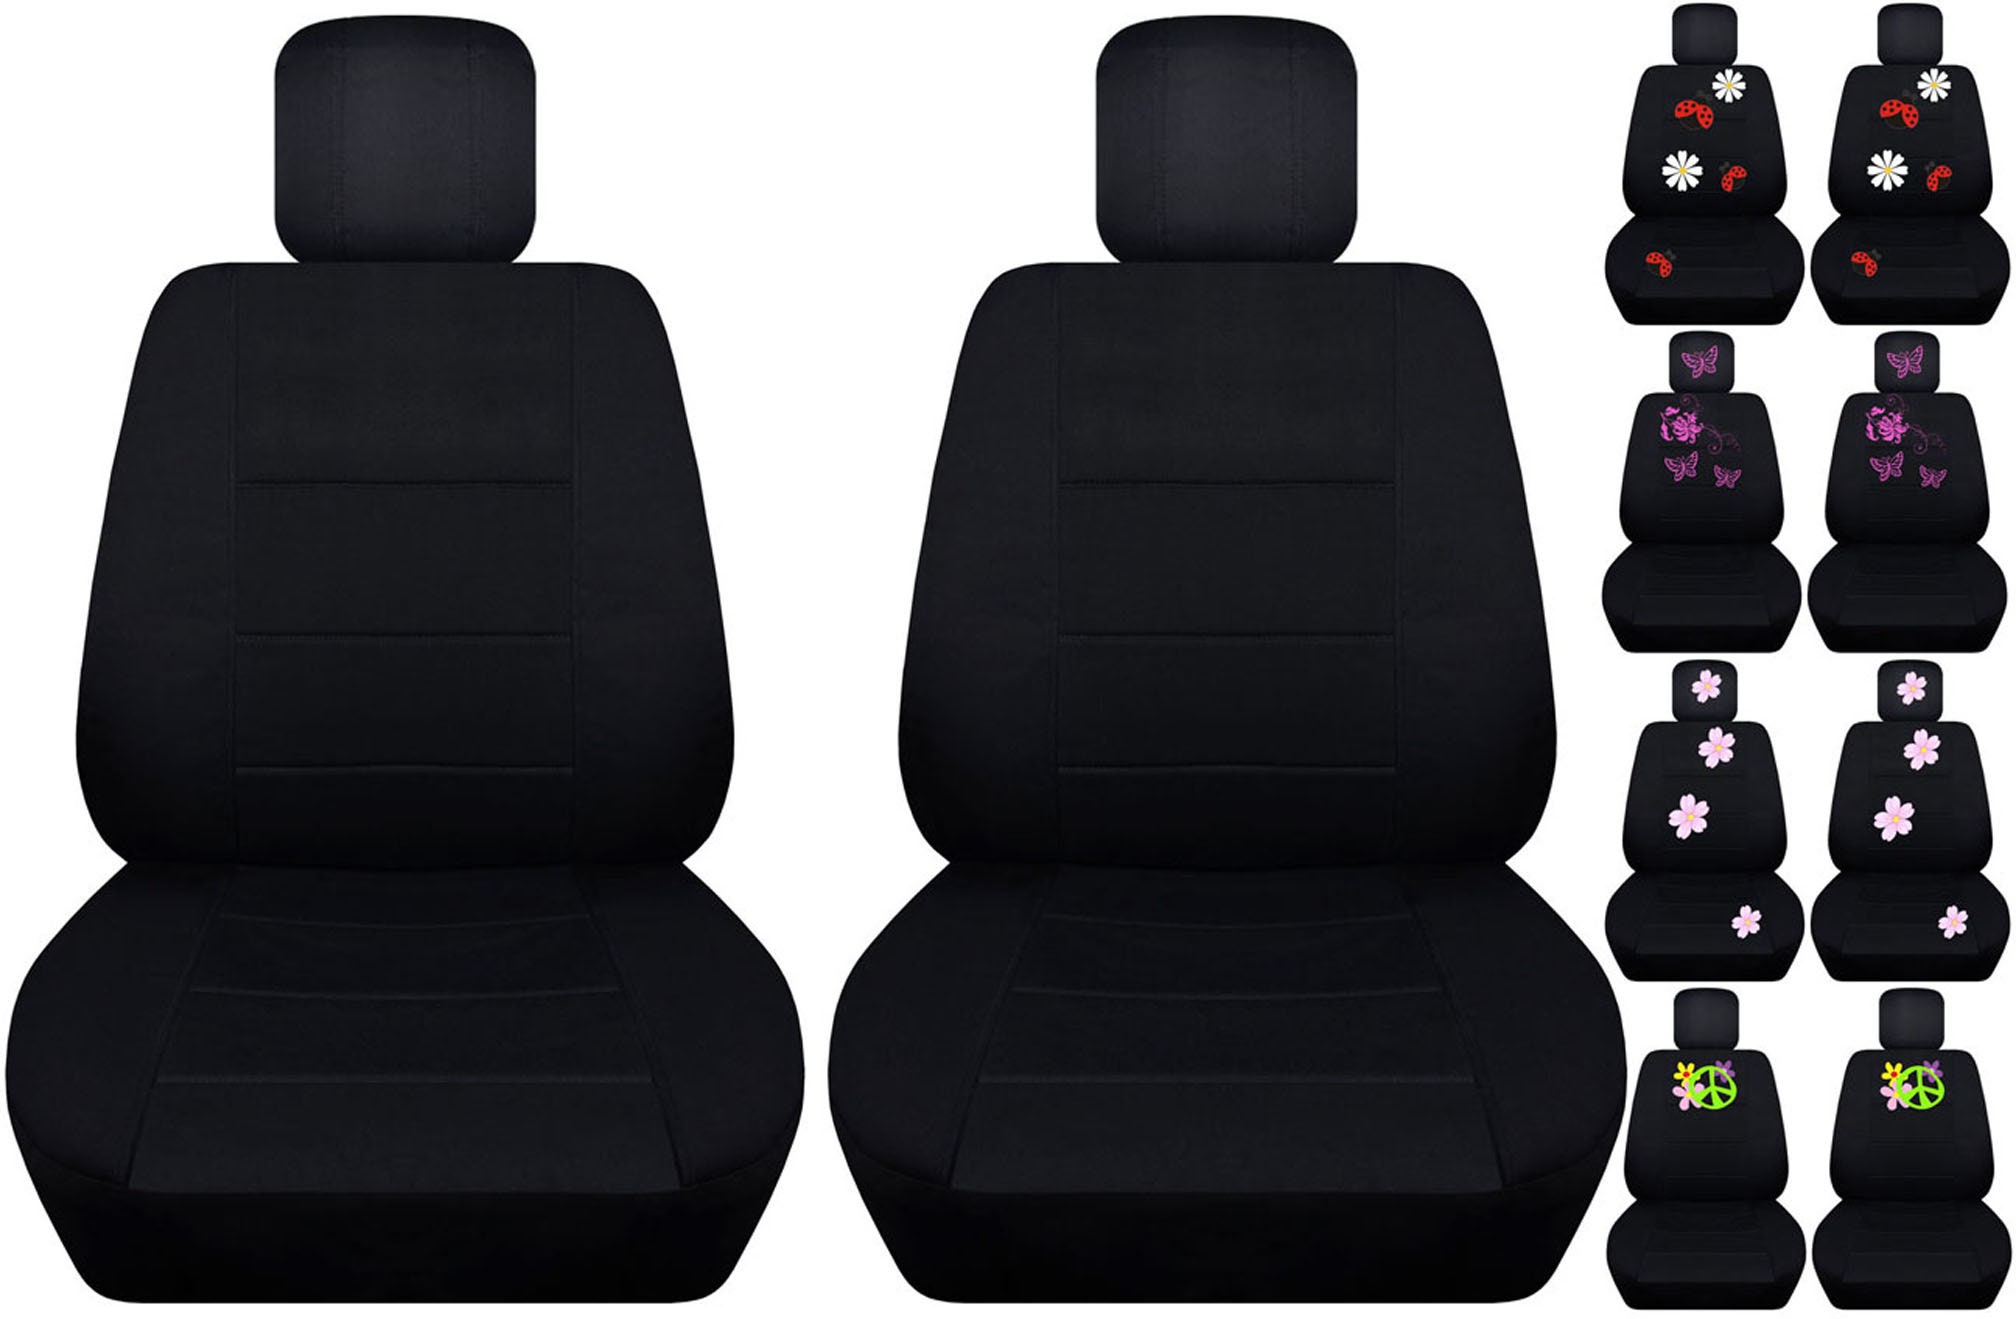 VW SEAT COVERS - NEW for VW Beetle $35 - auto parts - by owner